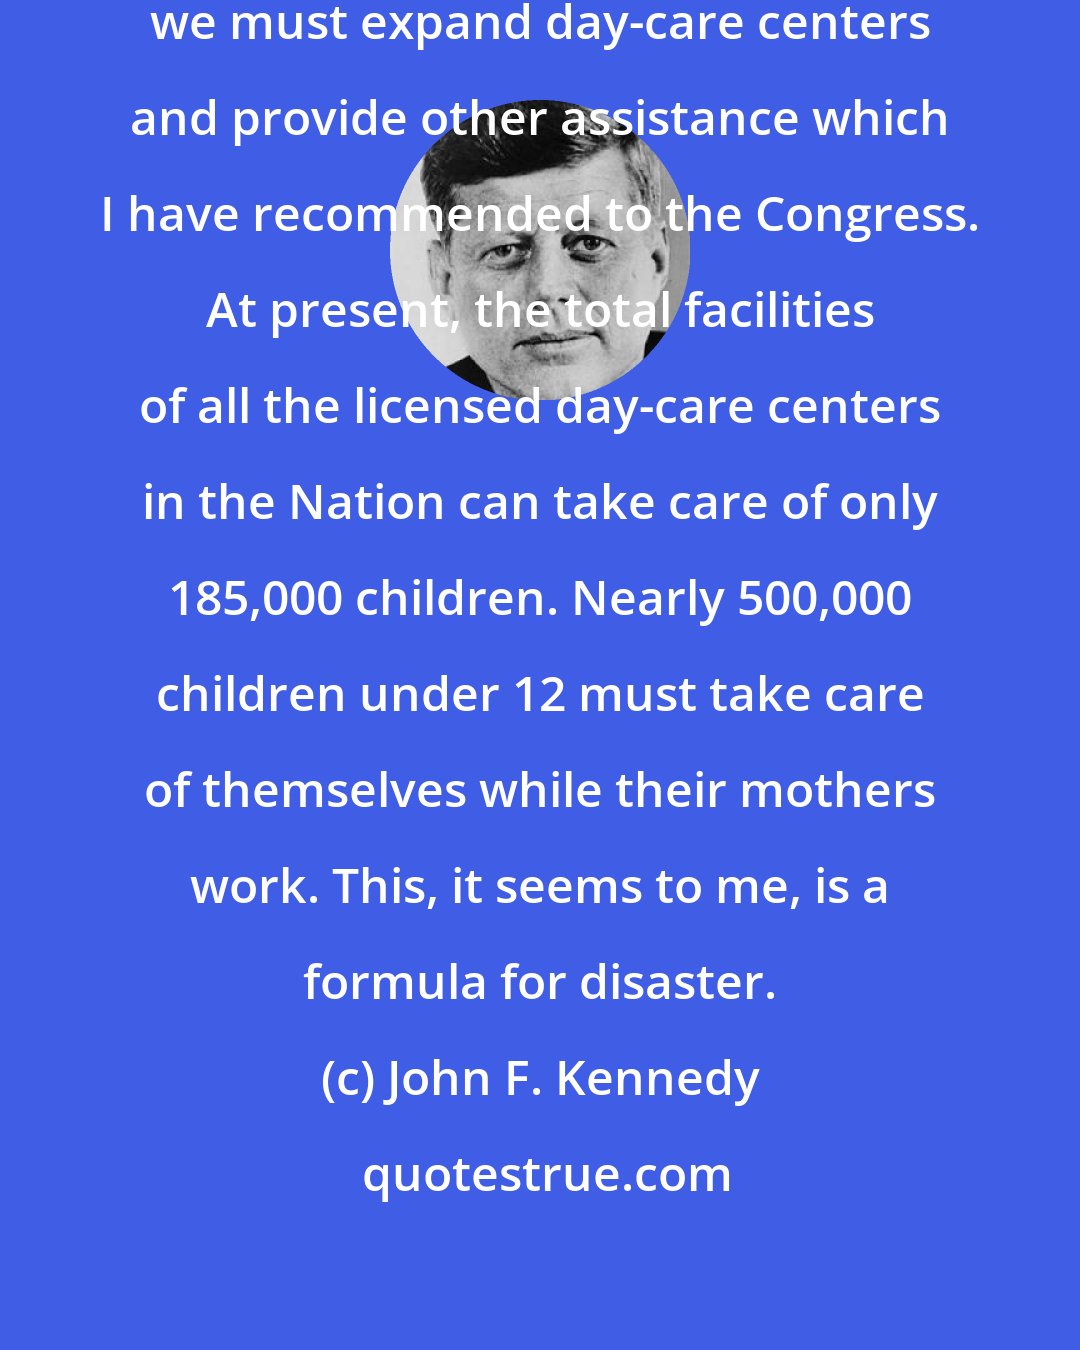 John F. Kennedy: It is for these reasons that I believe we must expand day-care centers and provide other assistance which I have recommended to the Congress. At present, the total facilities of all the licensed day-care centers in the Nation can take care of only 185,000 children. Nearly 500,000 children under 12 must take care of themselves while their mothers work. This, it seems to me, is a formula for disaster.